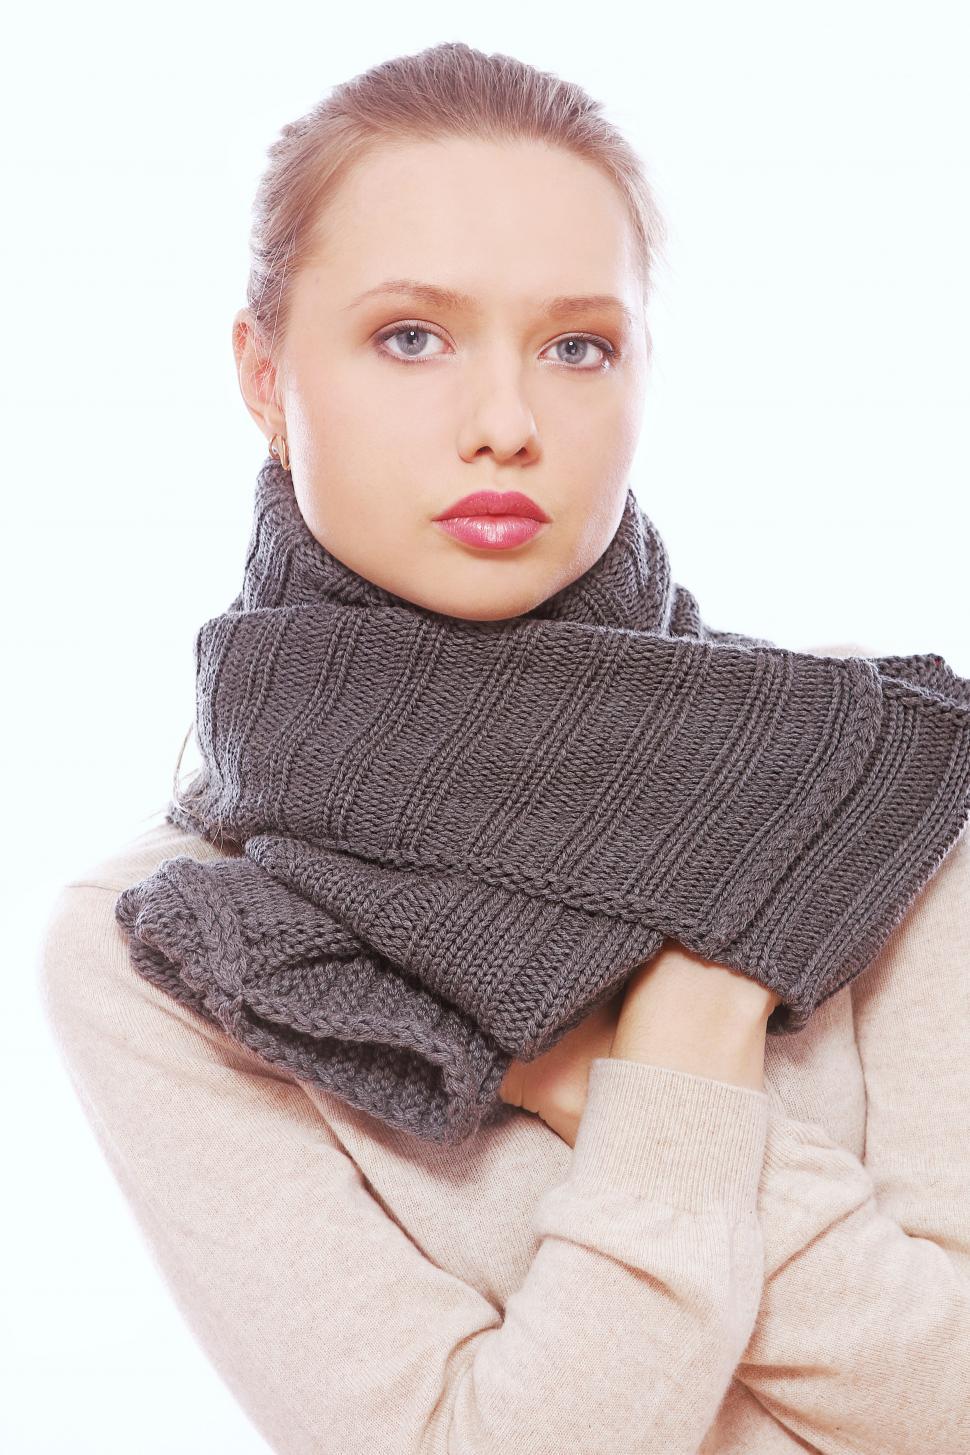 Free Image of Portrait of young woman with a scarf 